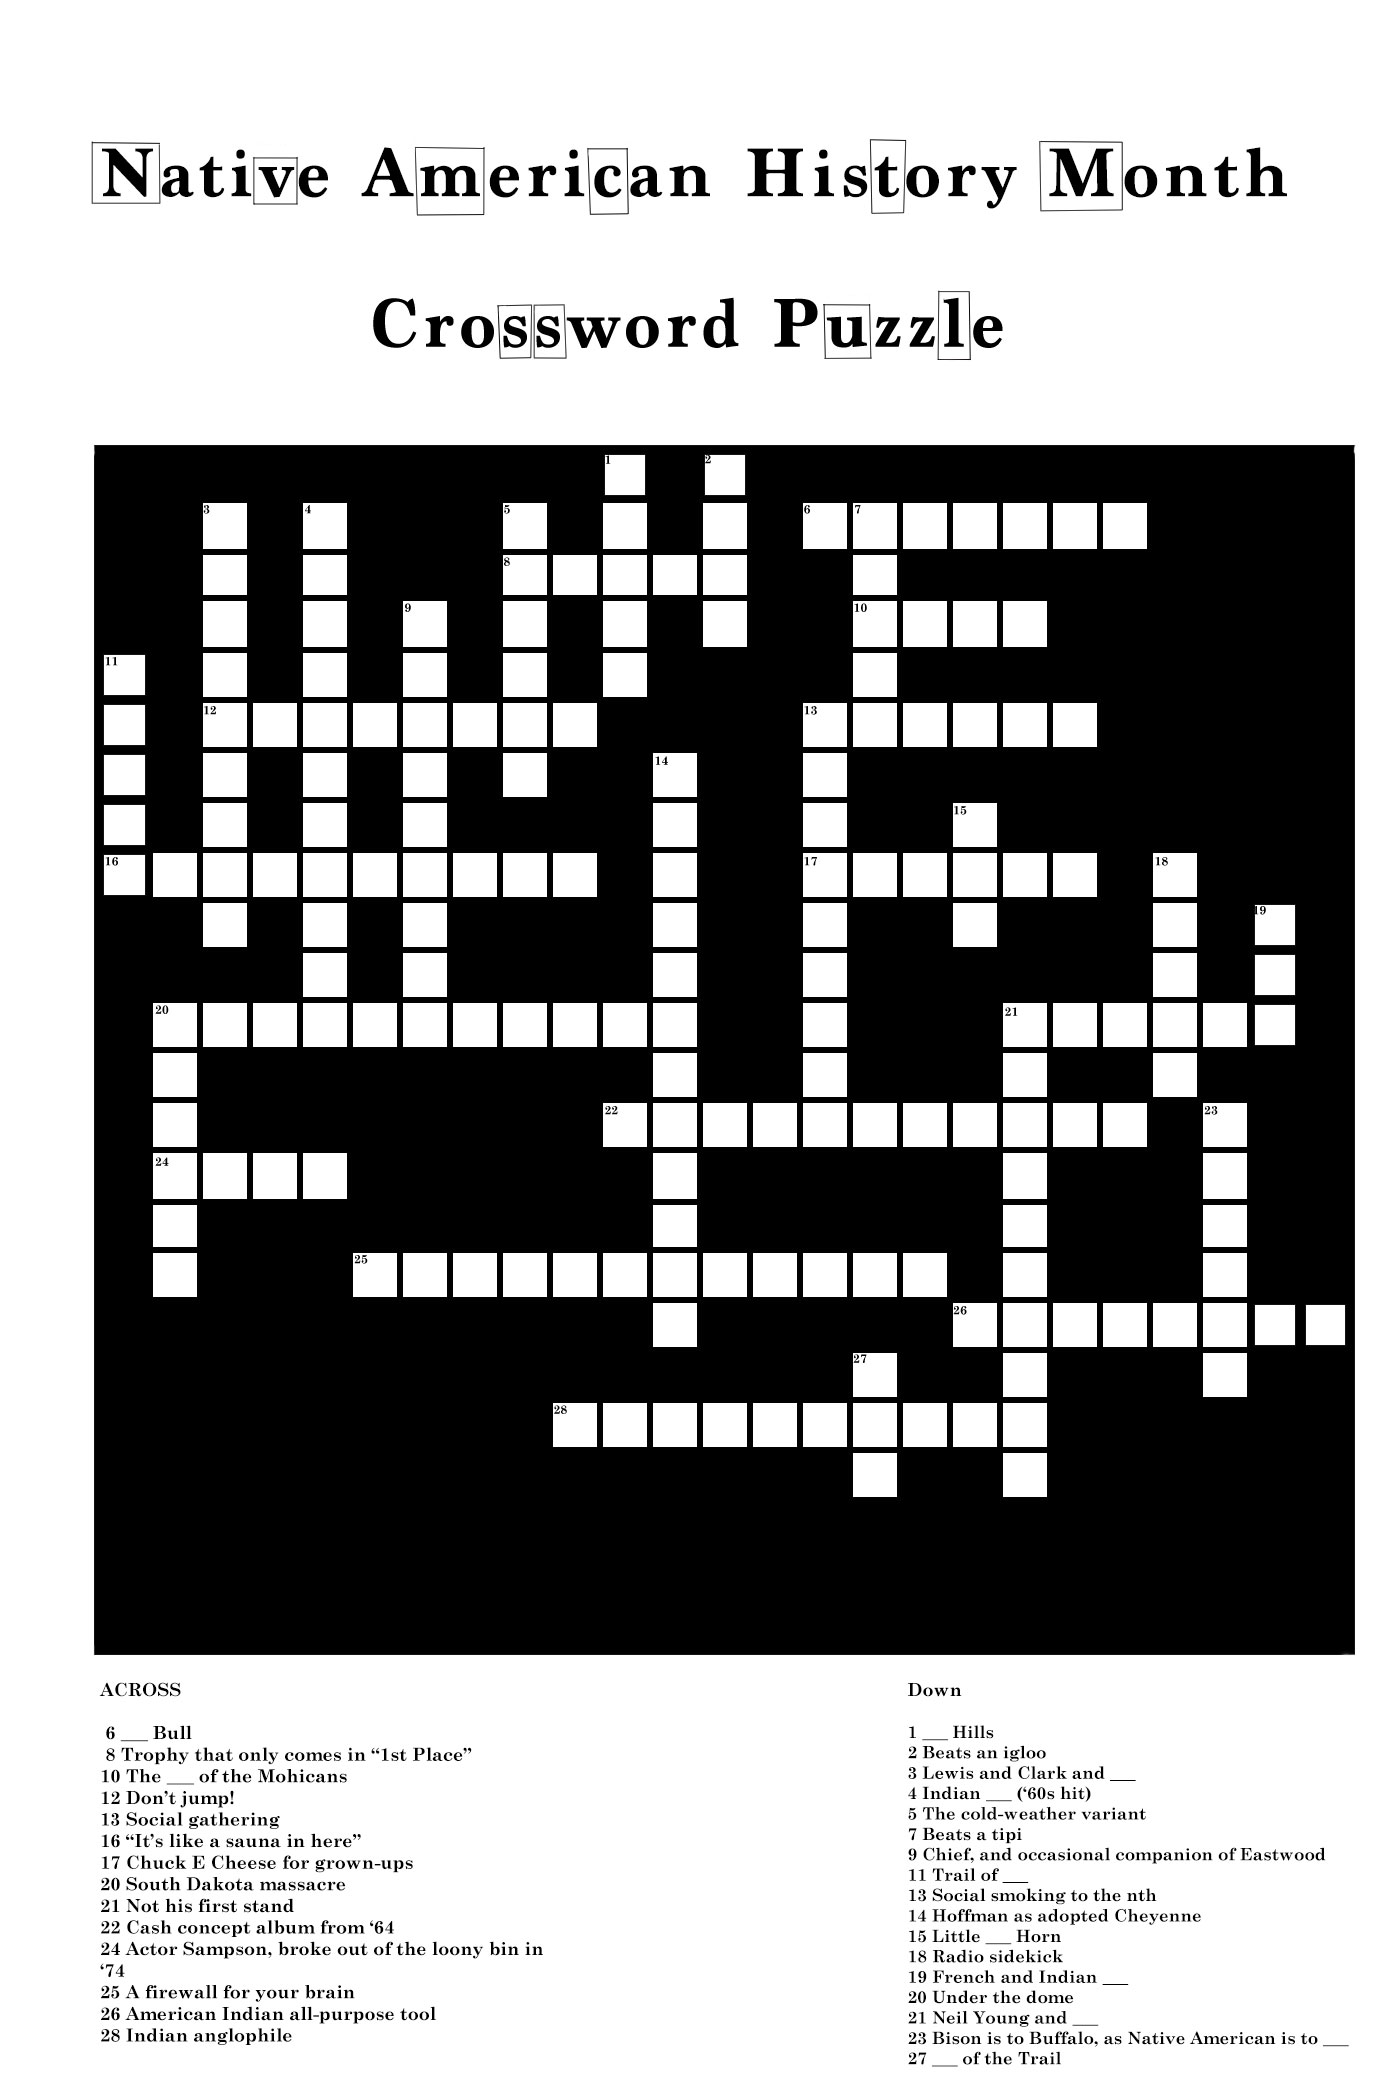 Crossword puzzle image: A crossword puzzle for Native American History Month. Graphic created by The Signal reporter Hunter Lanier.